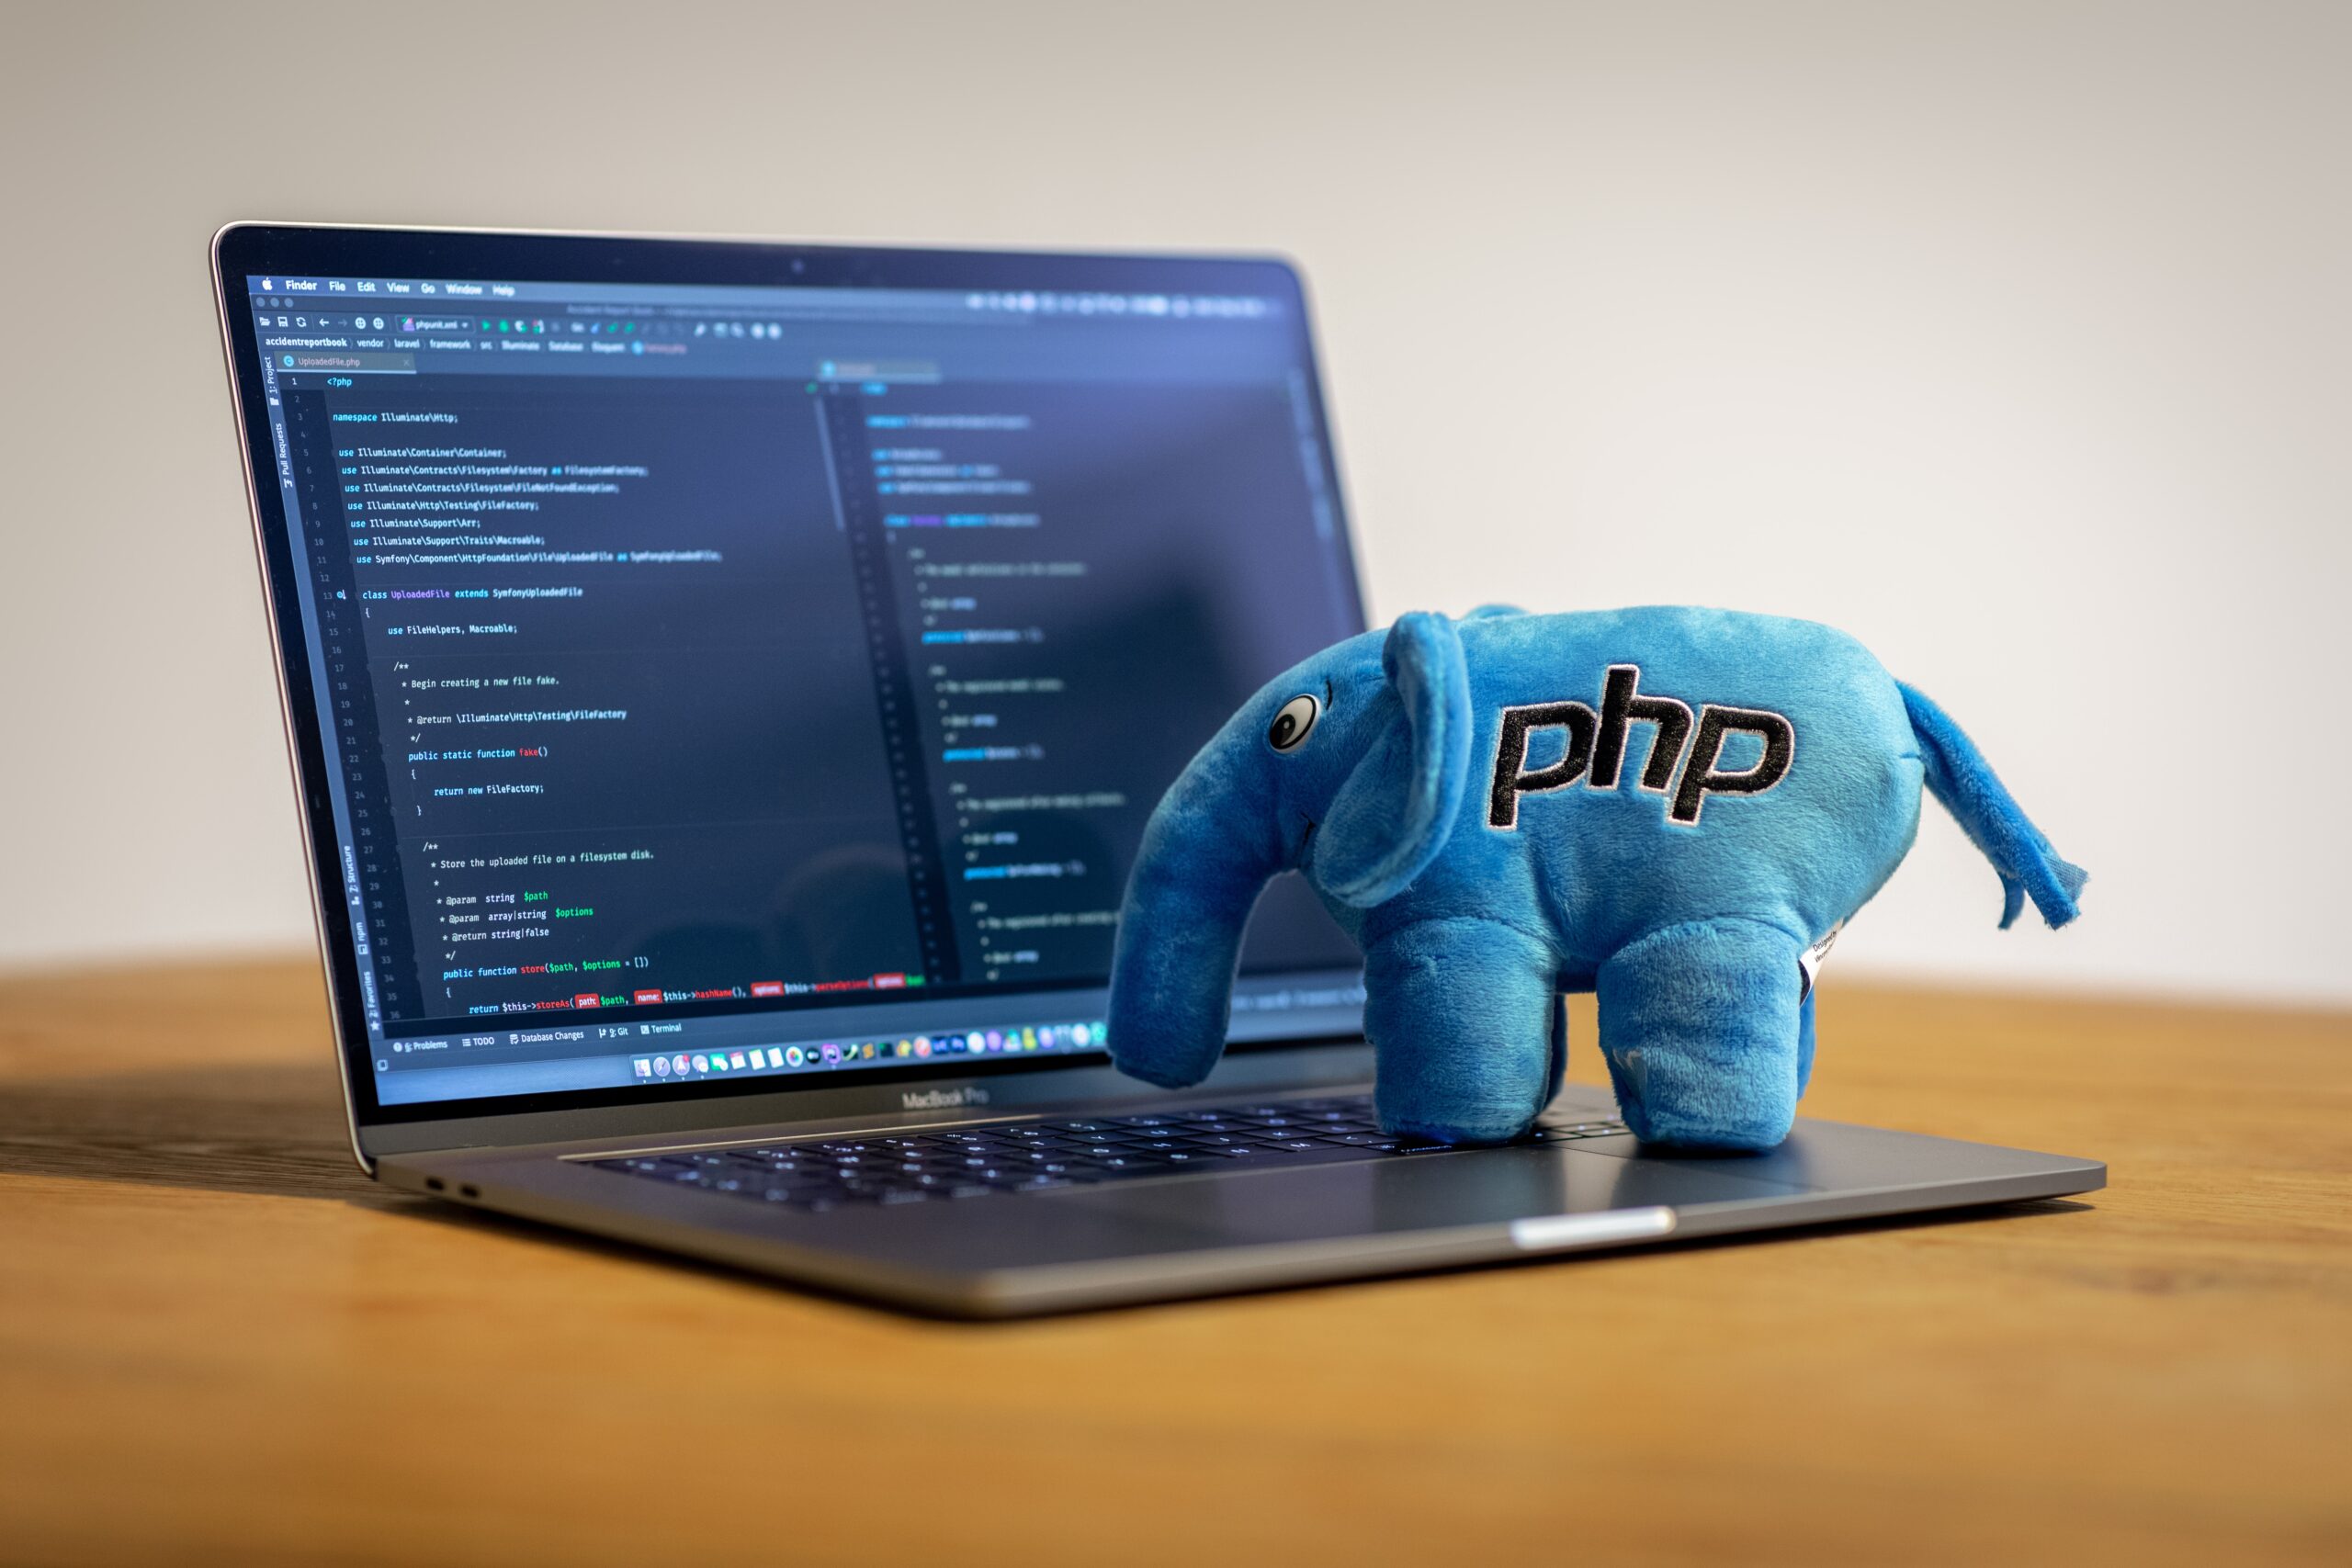 PHP Plush Elephant on a Macbook Pro, with PHP Storm running on it.